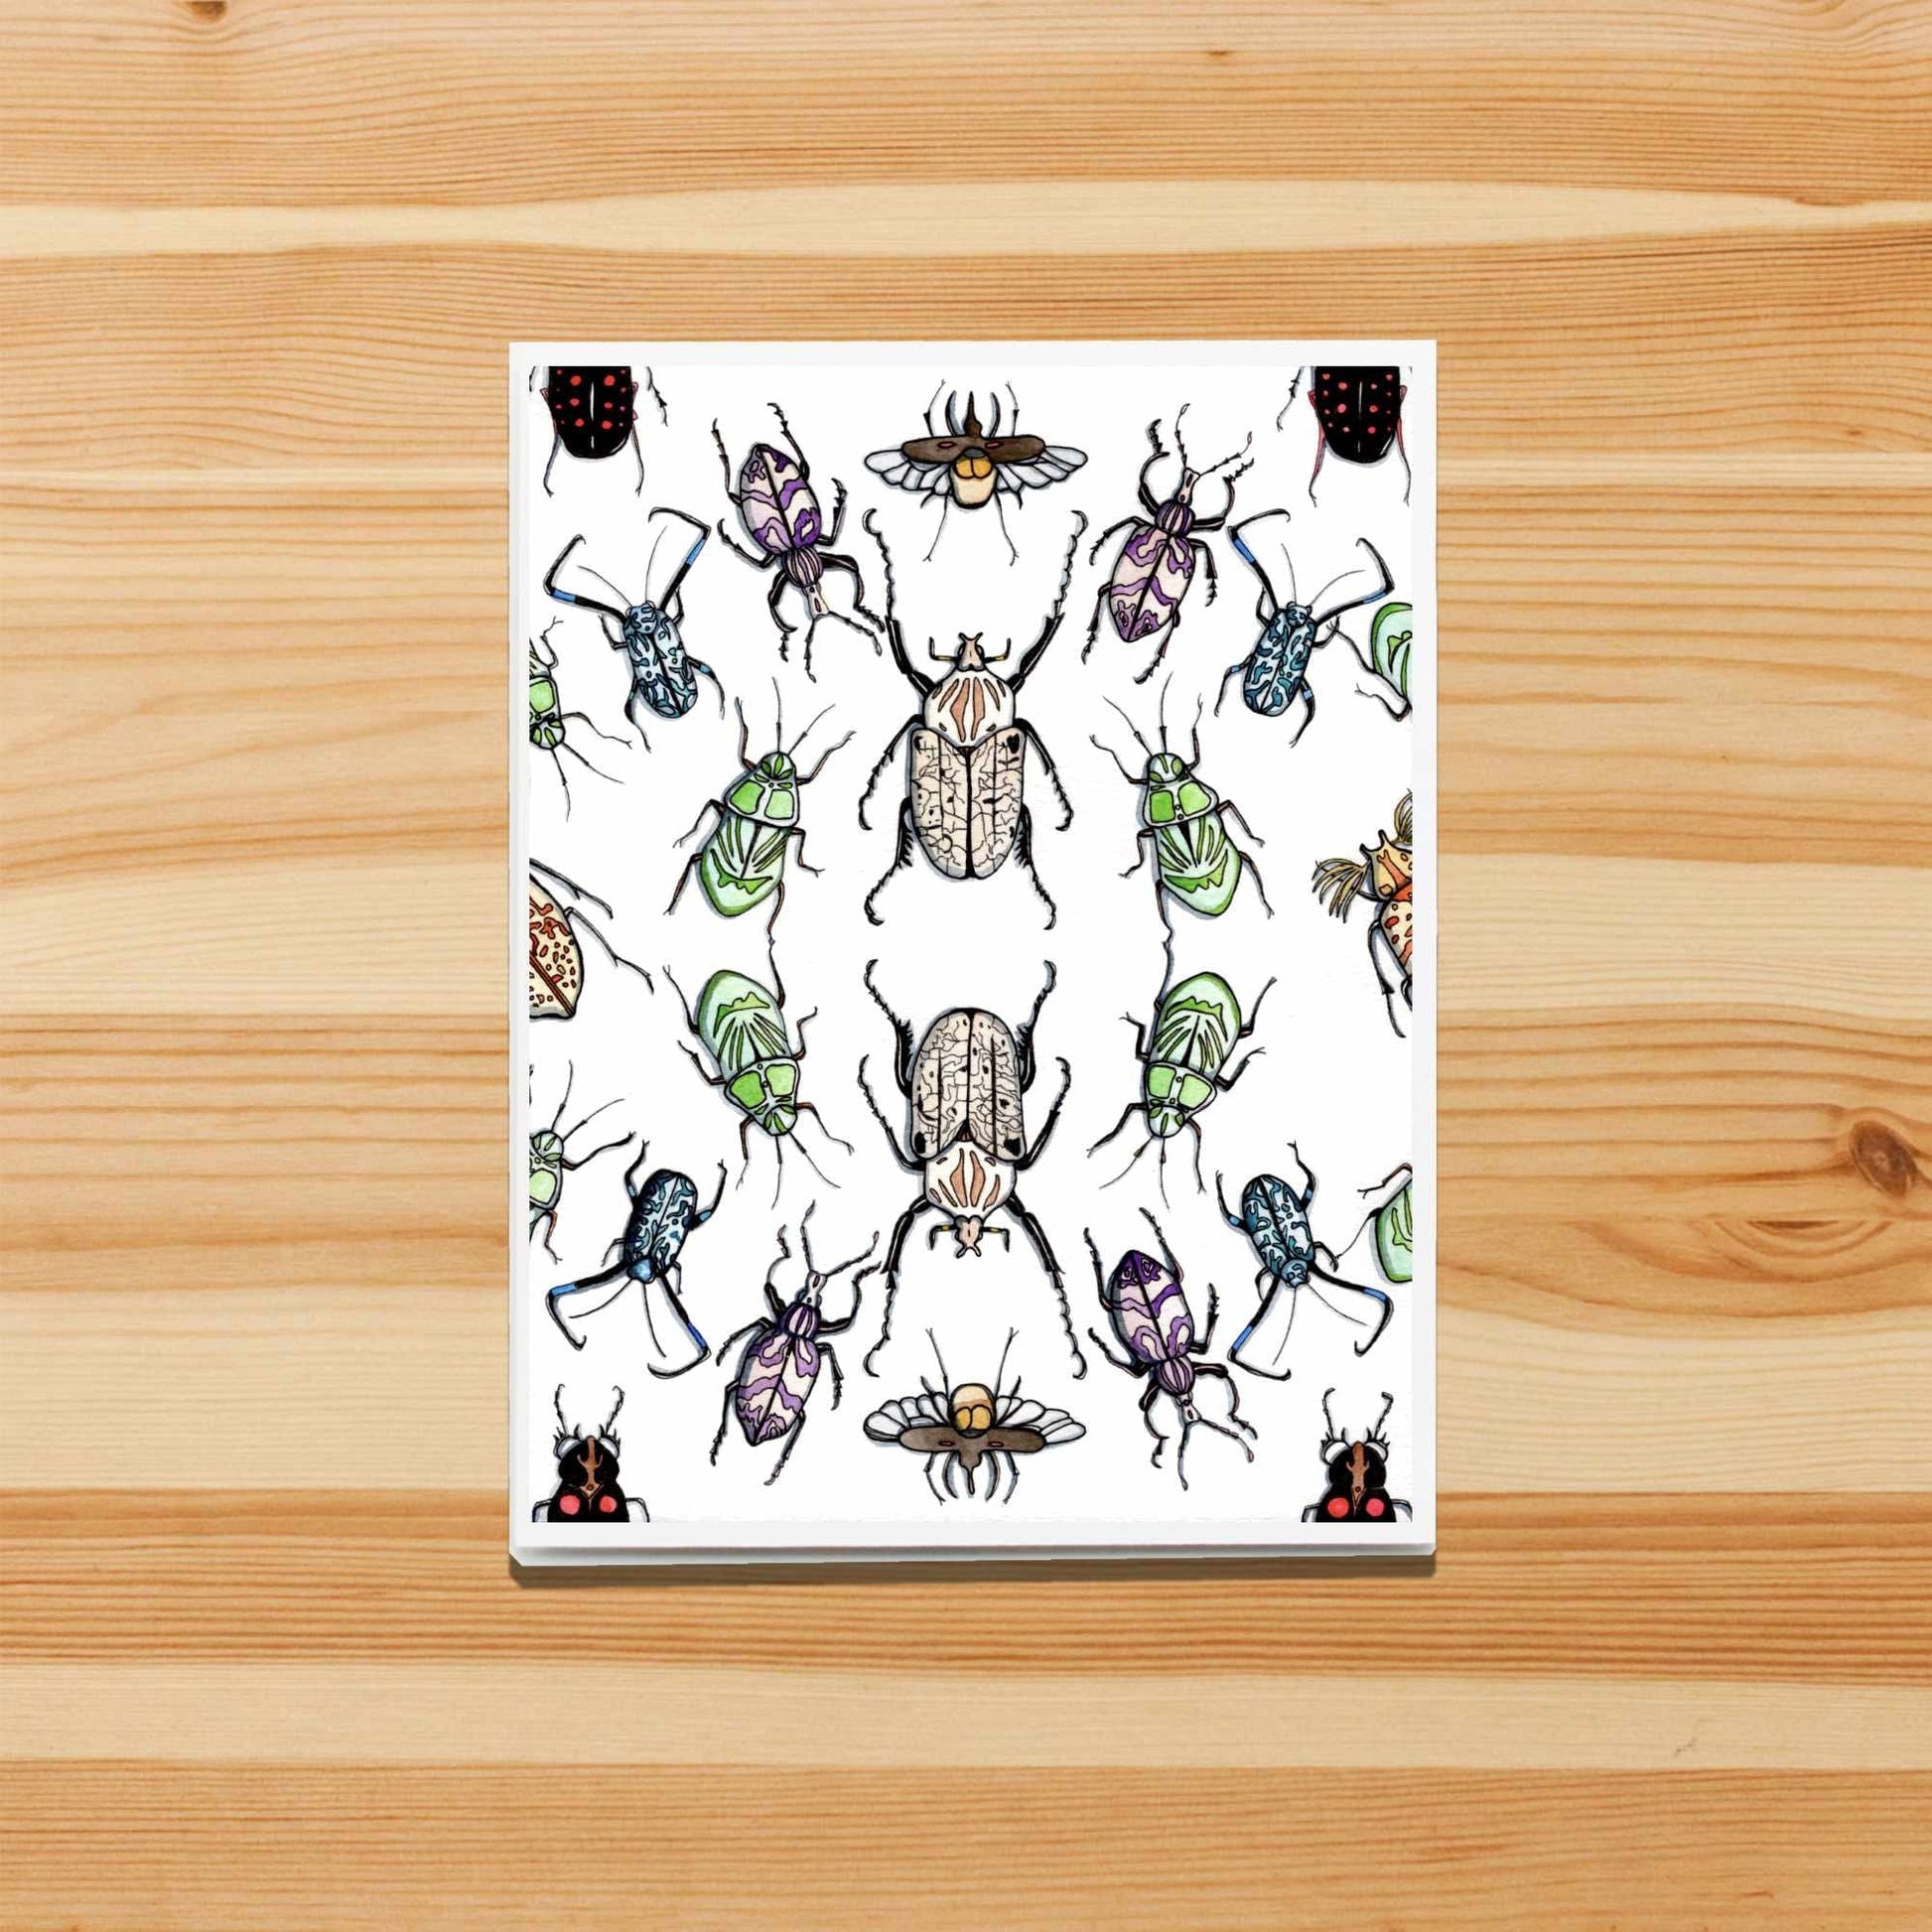 PinkPolish Design Note Cards "Beetle Repetition" Handmade Notecard